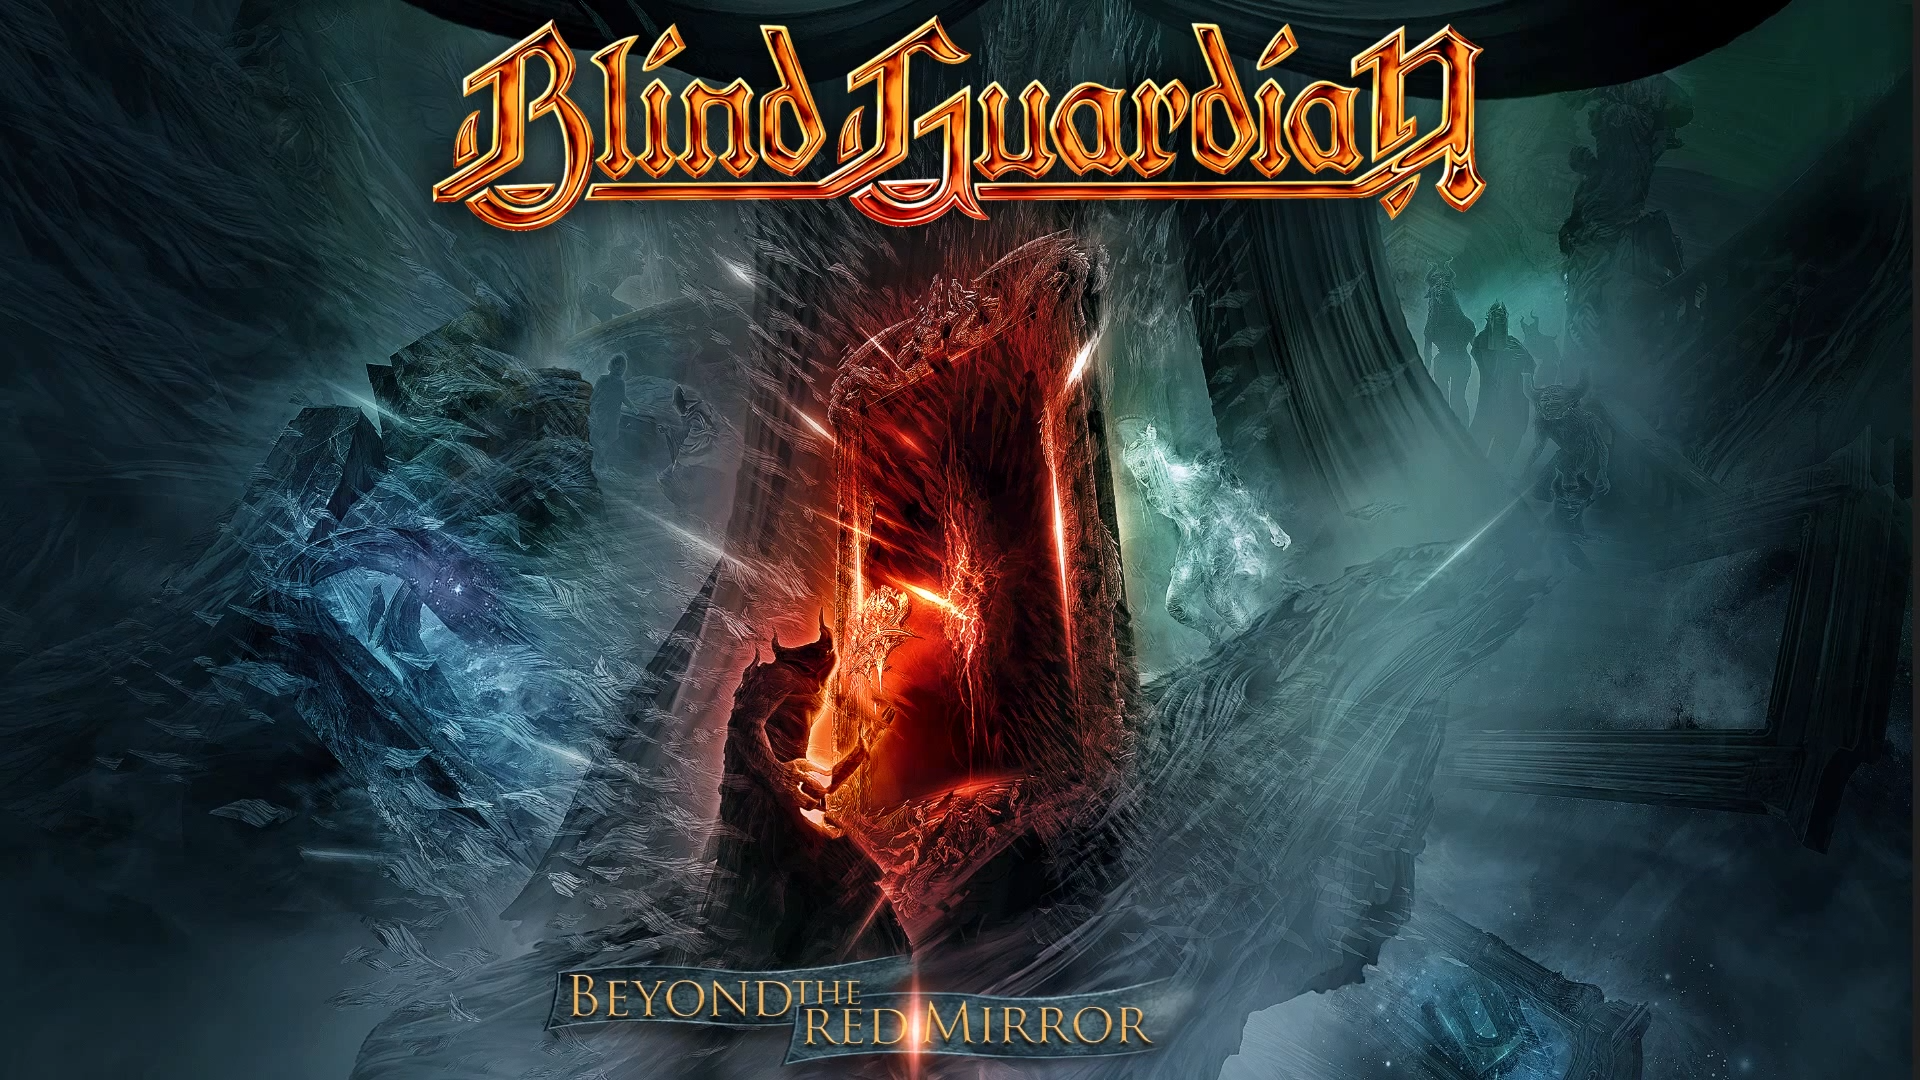 German metal band Blind Guardian wallpapers and images ...